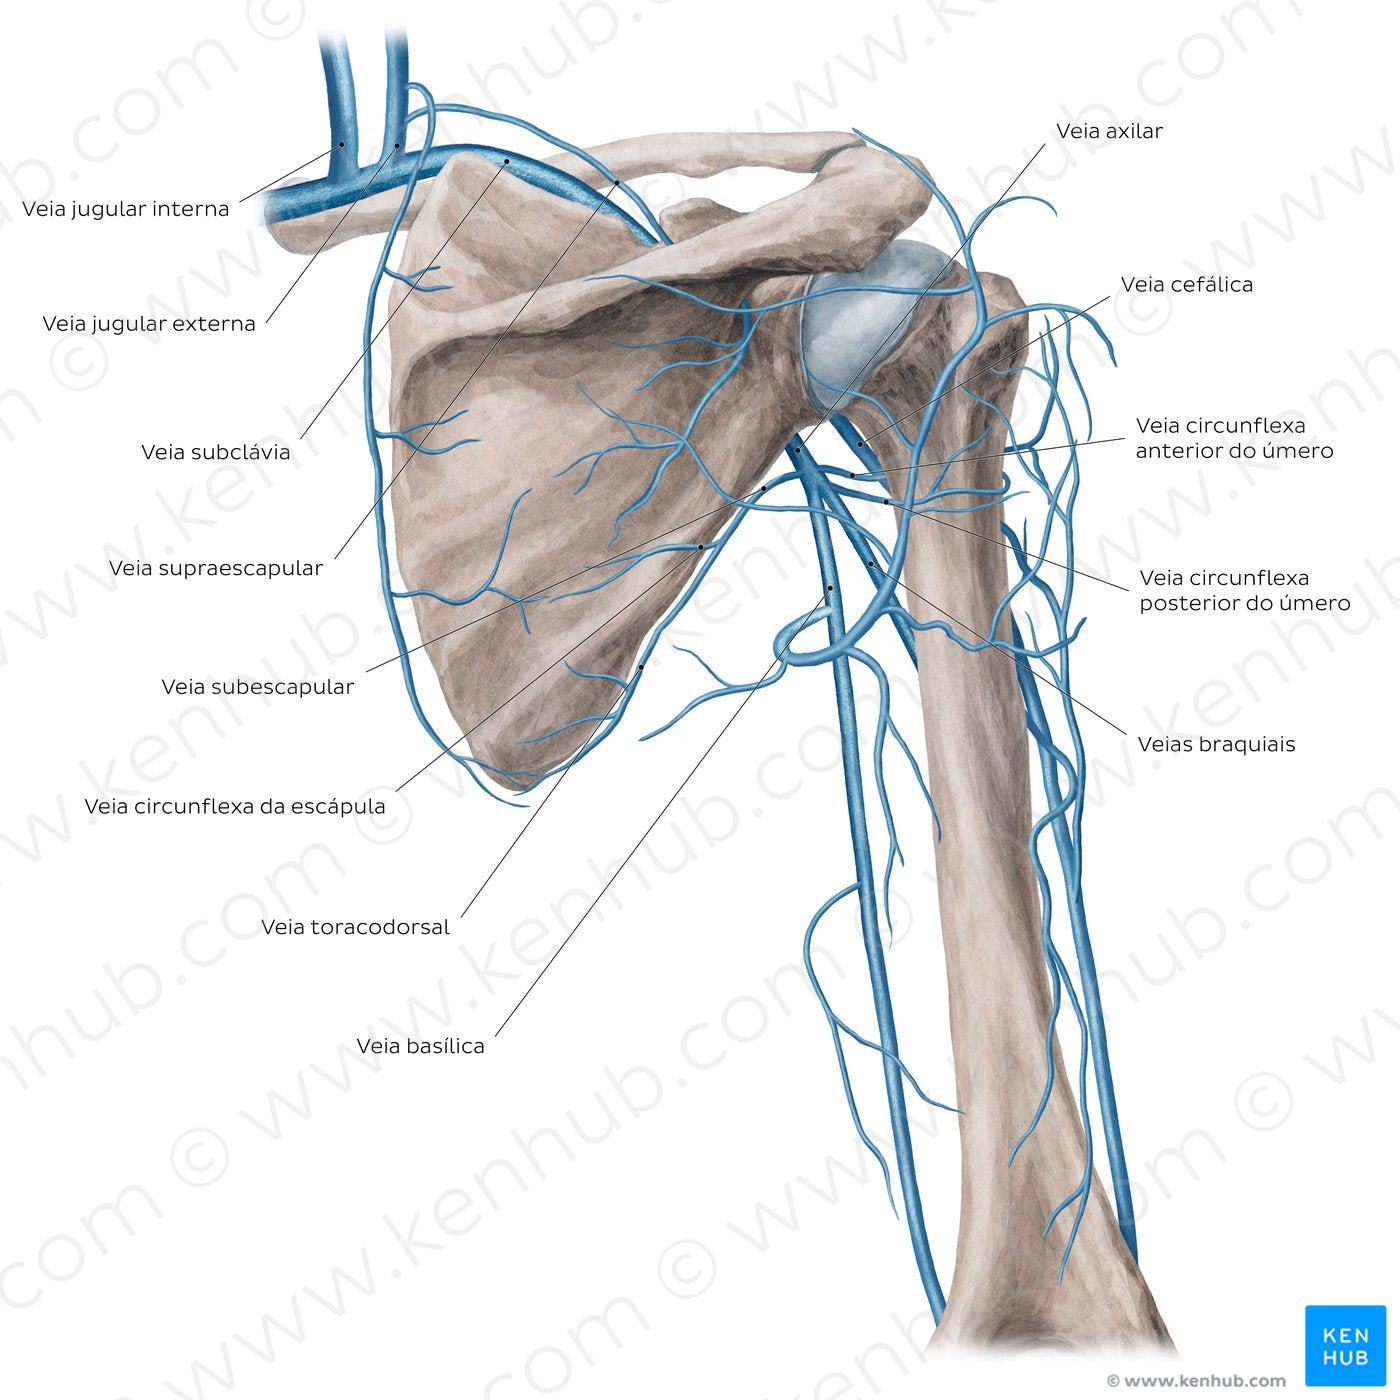 Veins of the arm and the shoulder - Posterior view (Portuguese)